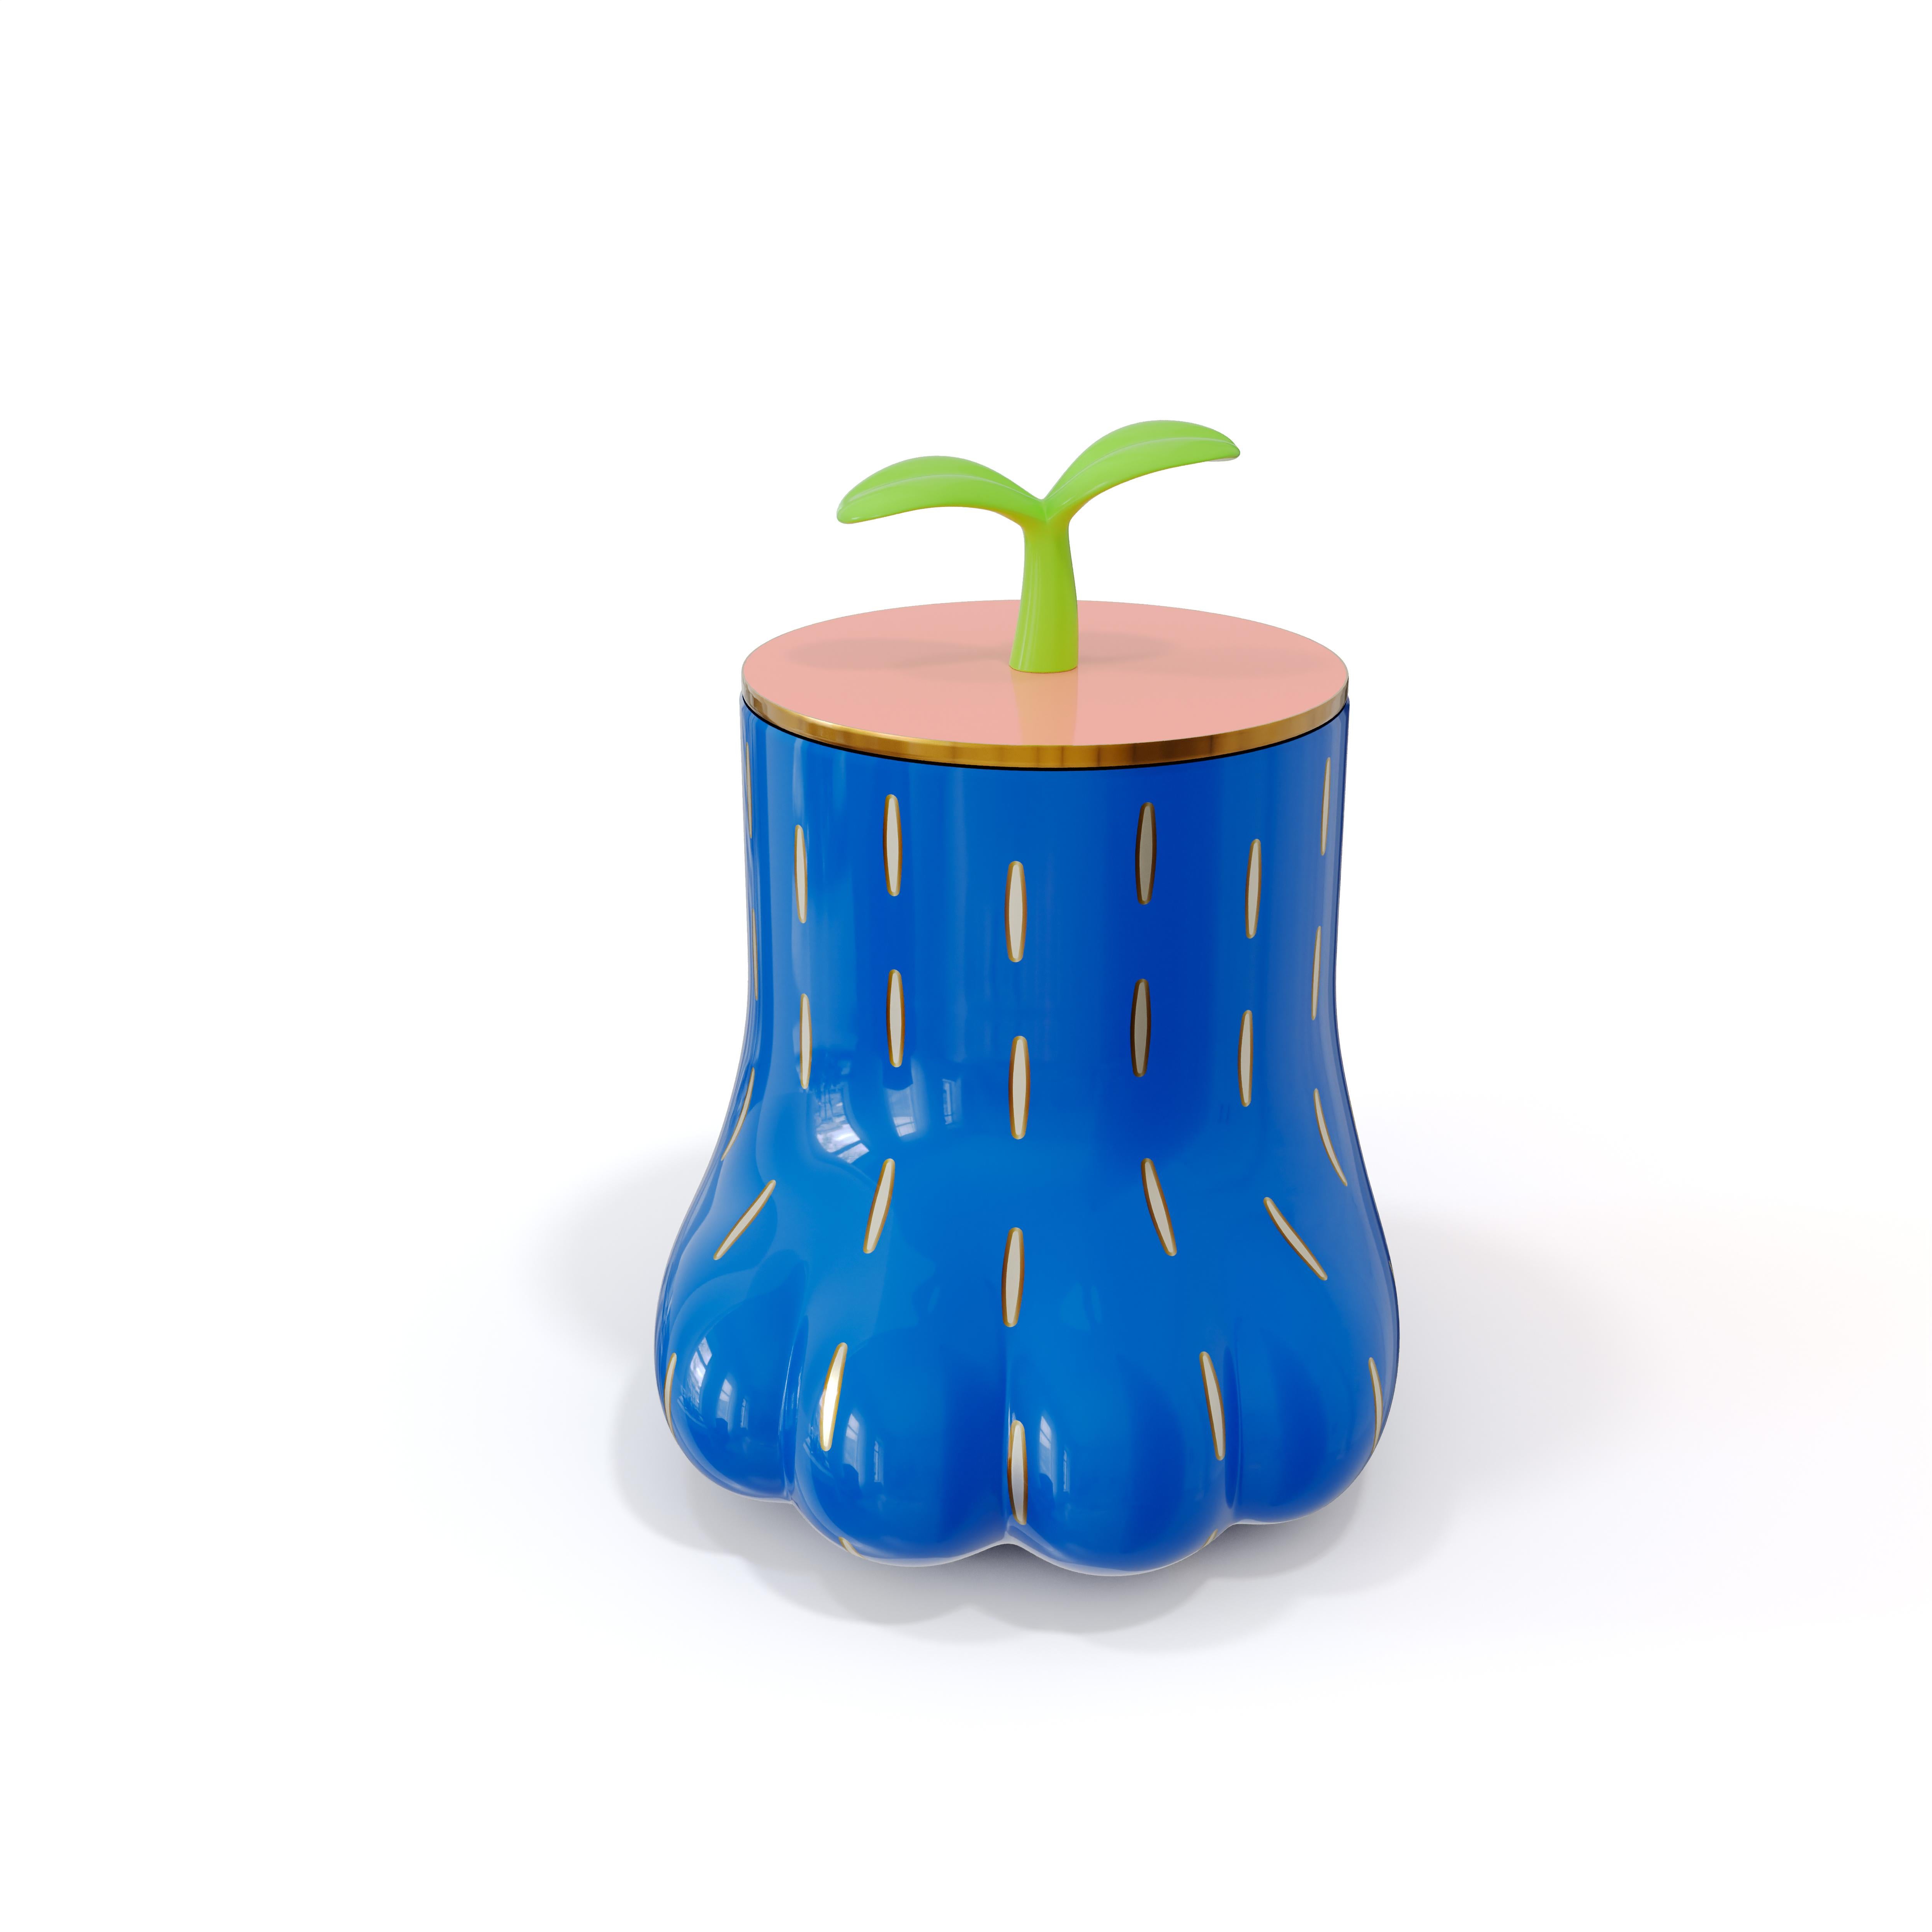 Paw Jar is a delightful object from the Forest collection. It has intricate brass and resin inlay in blue and pink, with an endearing leafy lid.

For his debut creations, Marcantonio introduced “Vegetal Animal”, a concept that evokes strong